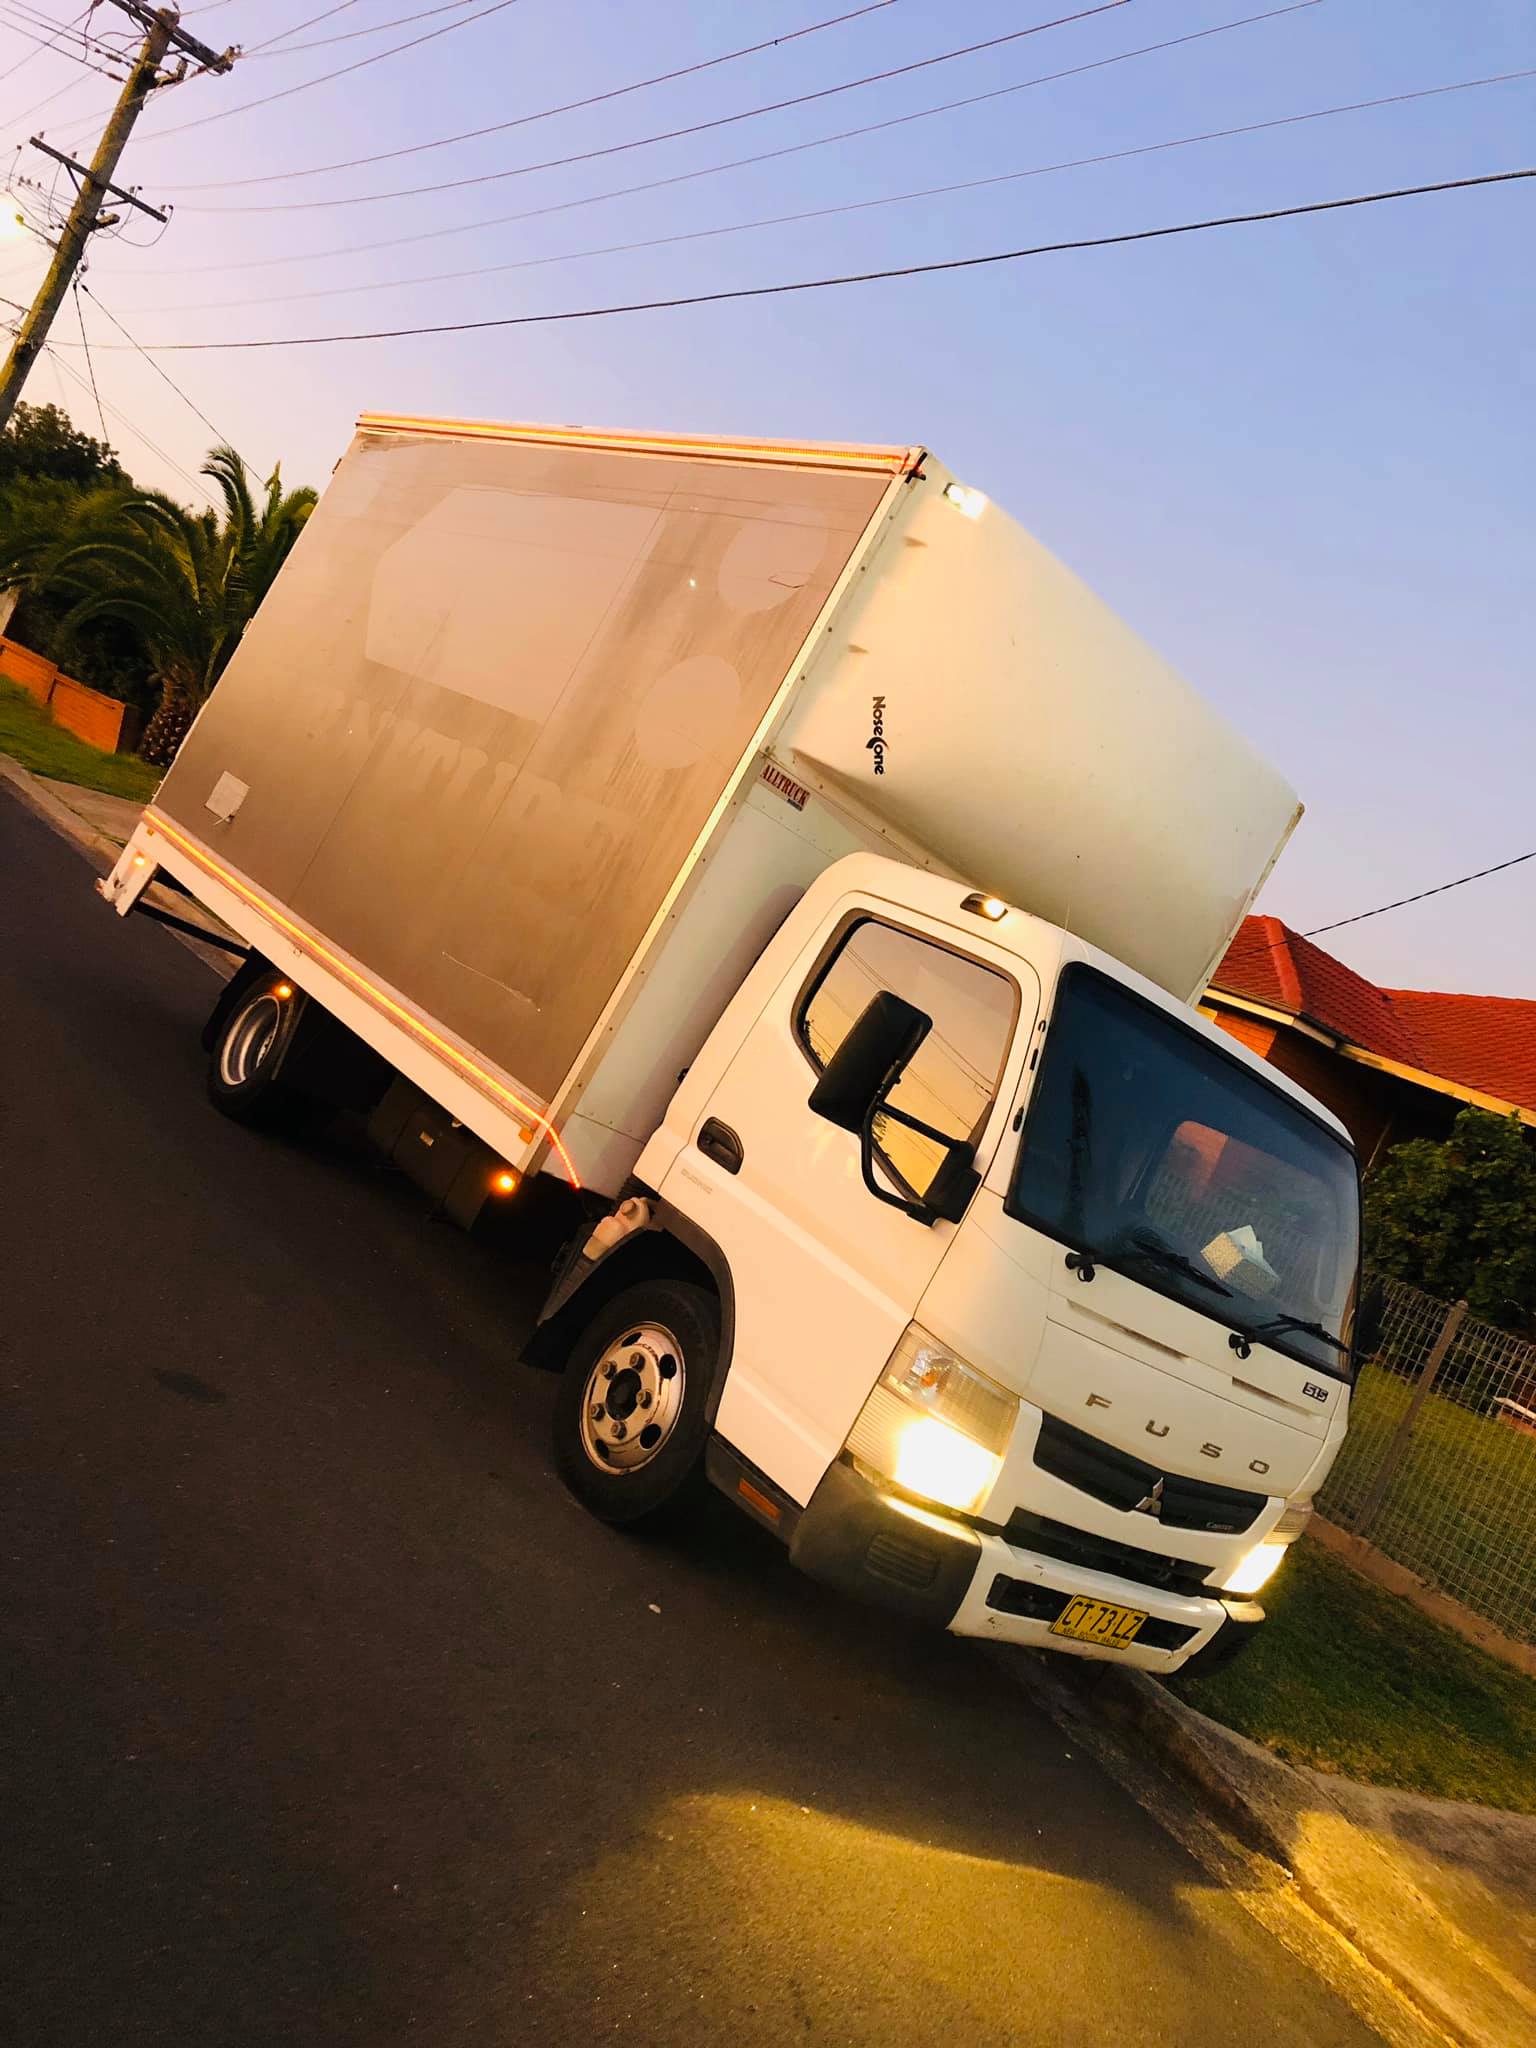 Packers and Movers near you